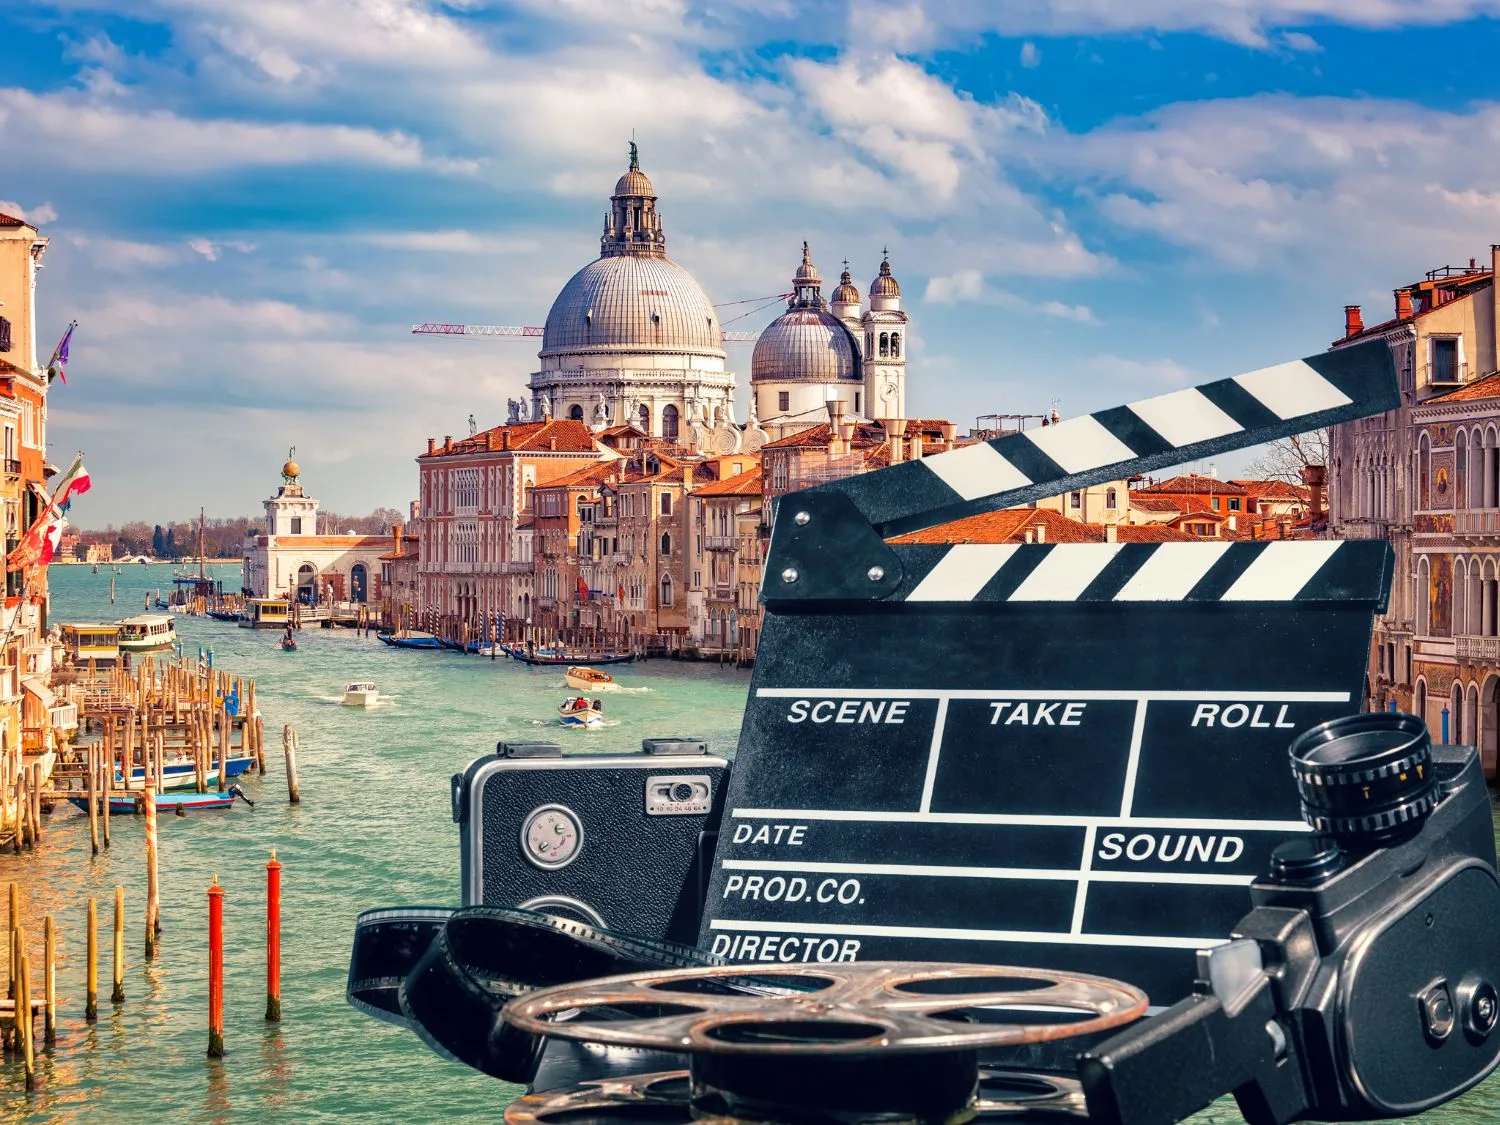 11 Extraordinary Movies Set In Venice That Will Inspire You To Visit!